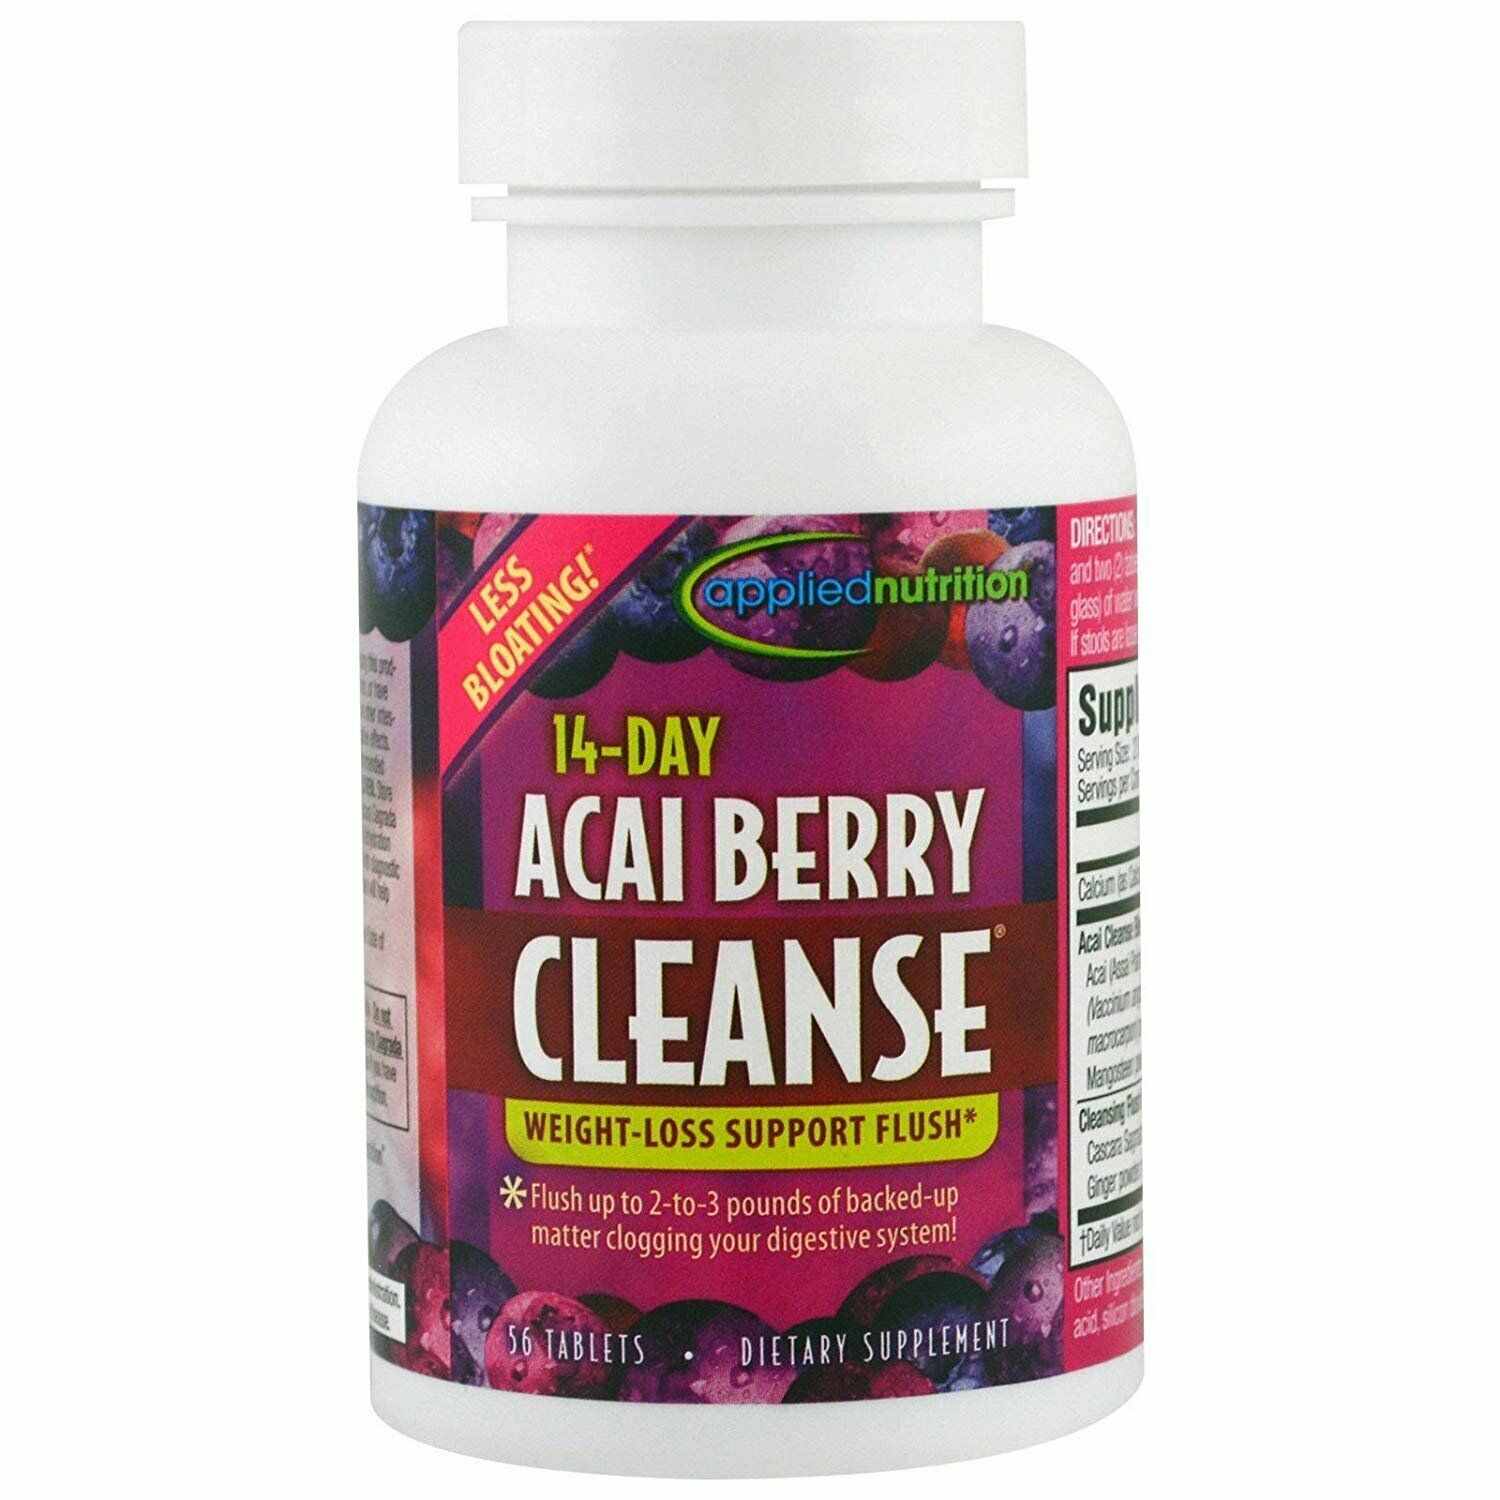 Applied Nutrition Acai Berry Cleanse Weight-Loss Support Flush Supplement Tablet, 56 Ct - image 2 of 7